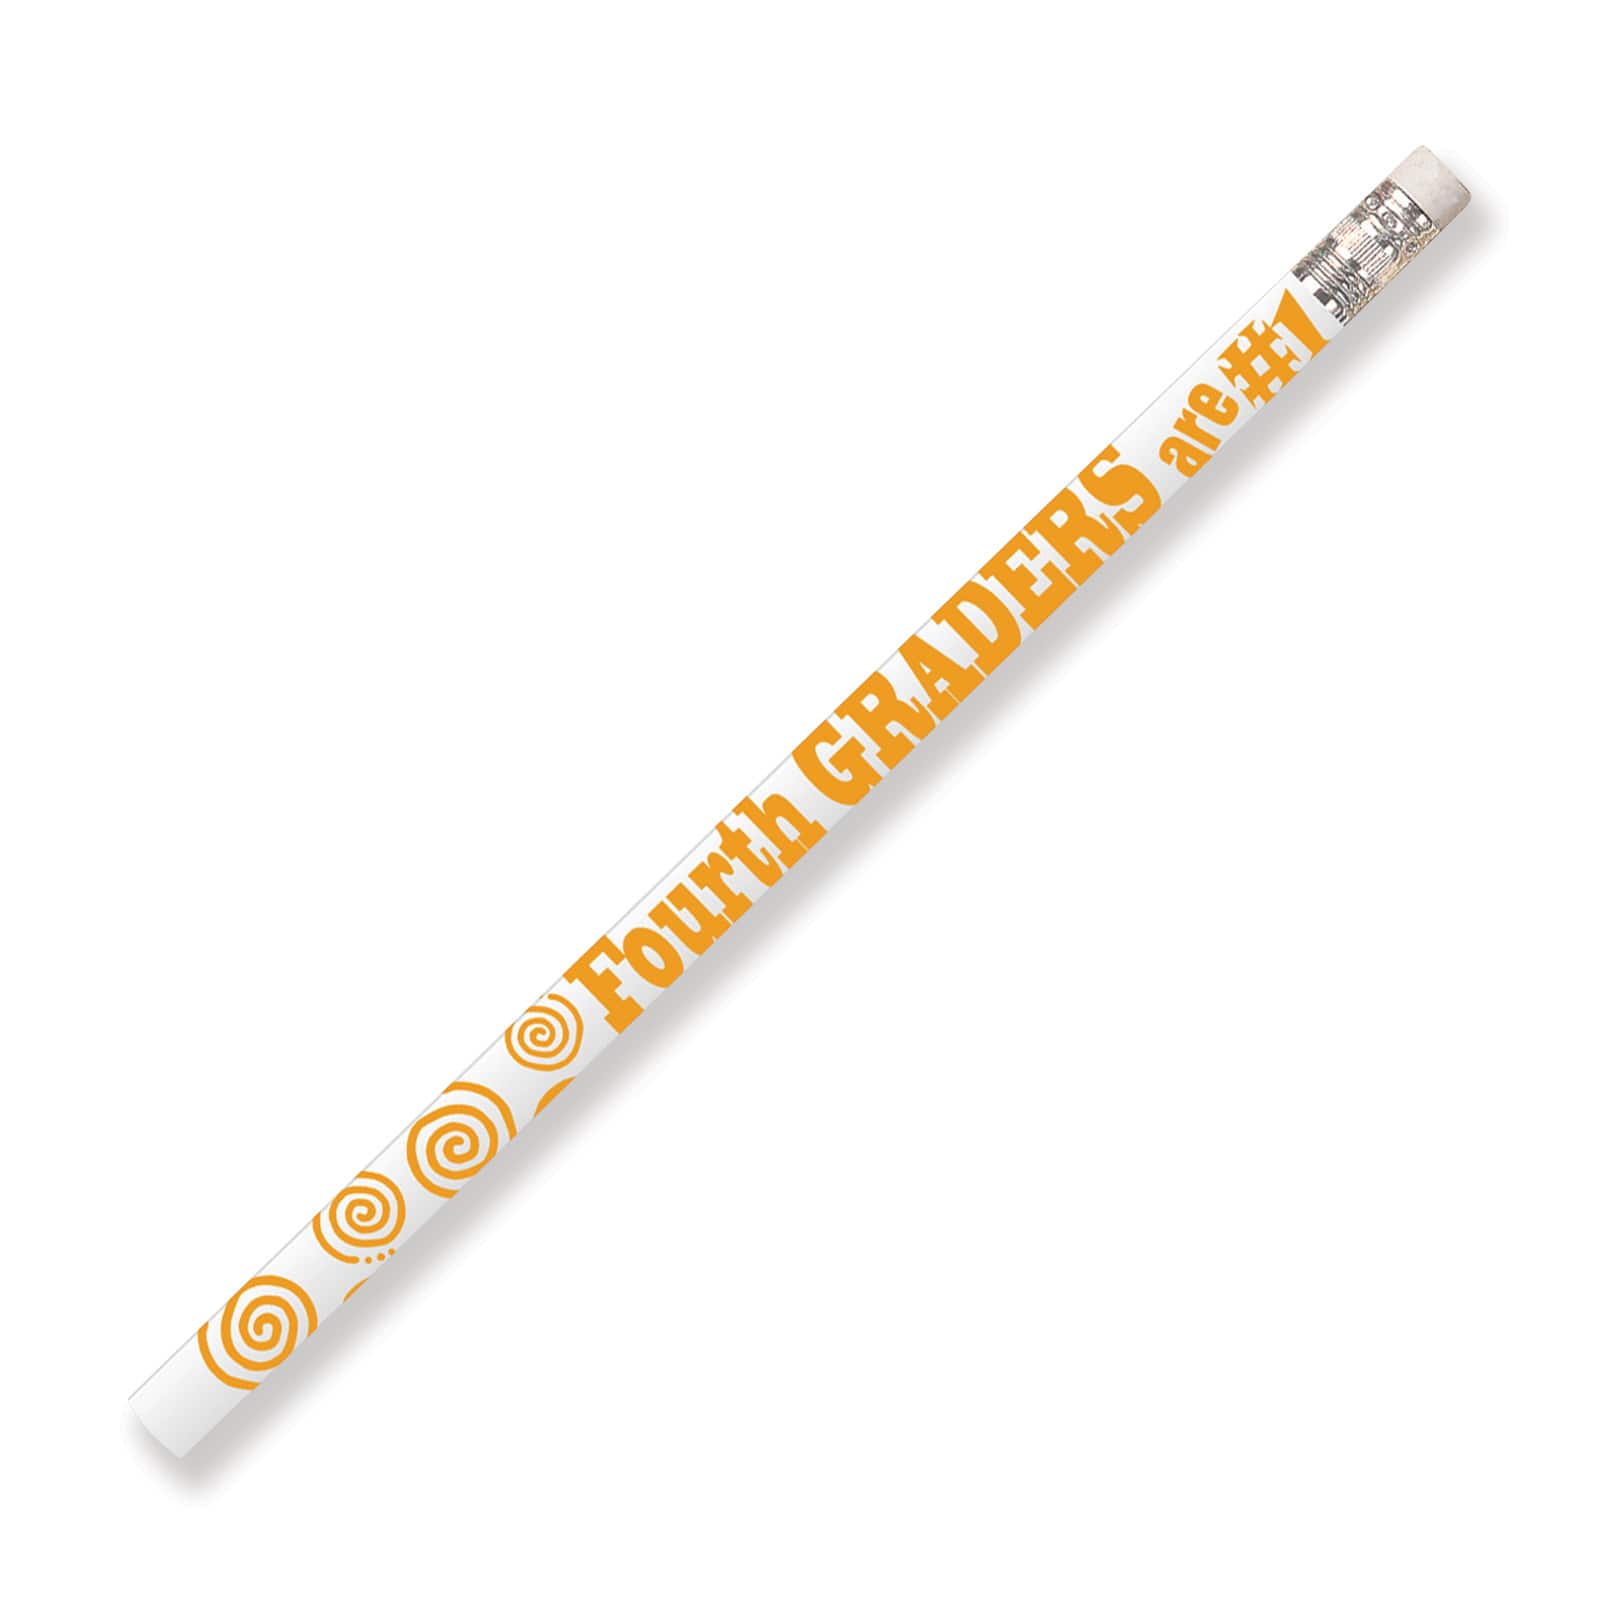 Musgrave Pencil &#x22;4th Graders Are #1&#x22; Motivational Pencils, 144 Pack